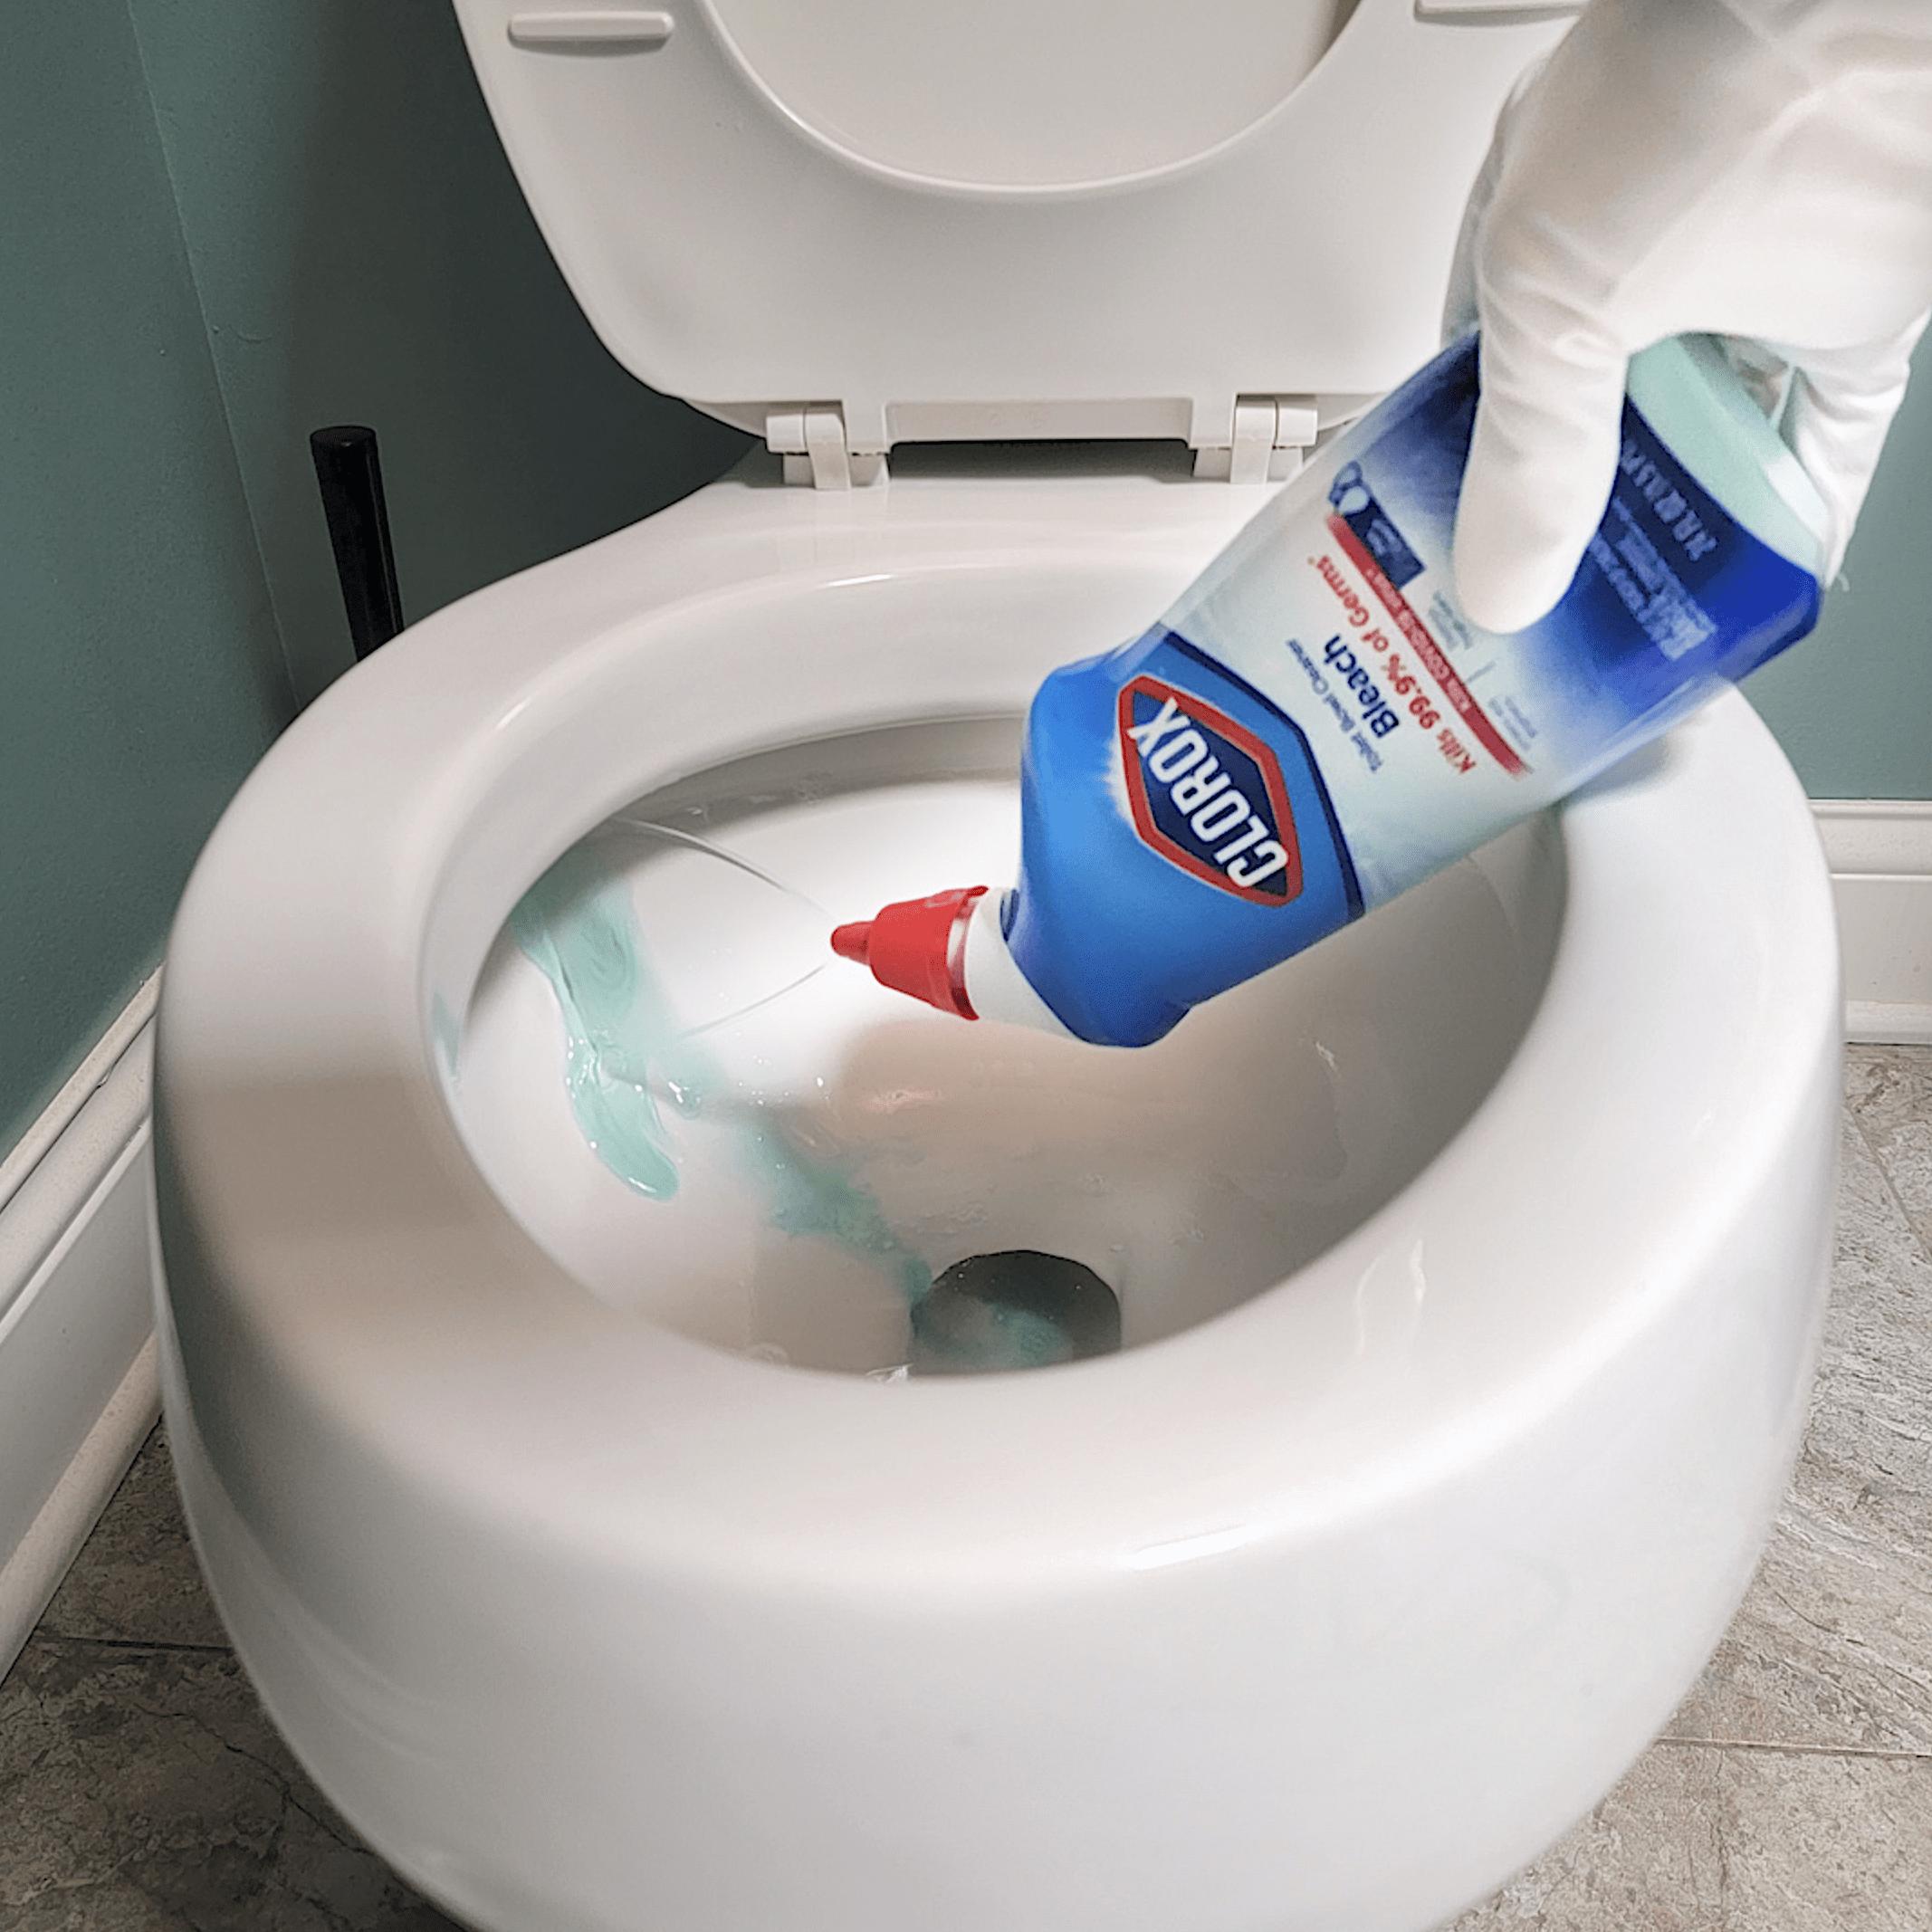 cleaning the toilet bowl with clorox toilet bowl cleaner